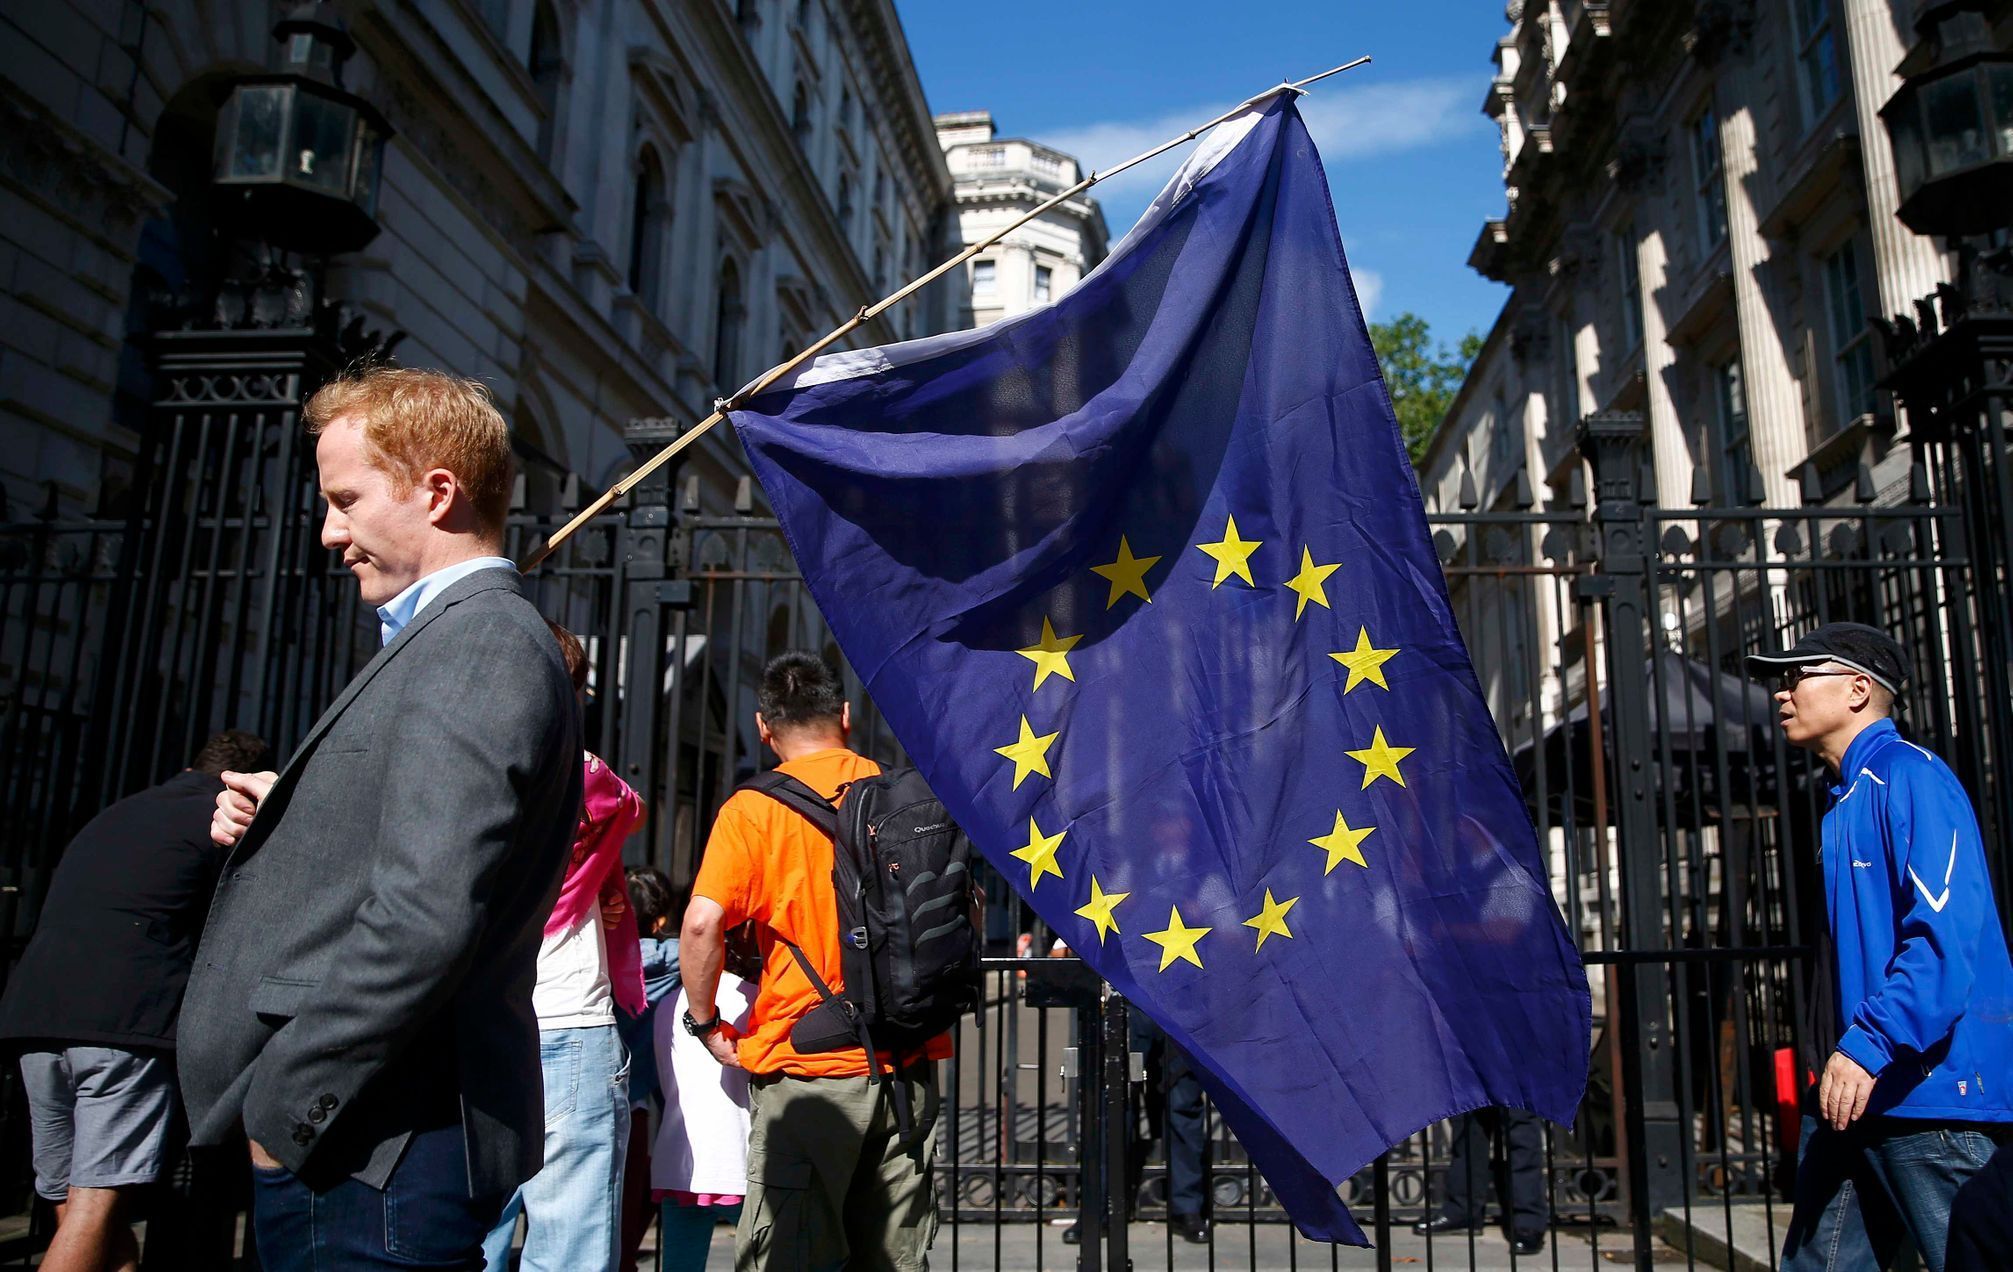 Brexit vlajka A man carries a EU flag, after Britain voted to leave the European Union, outside Downing Street in London